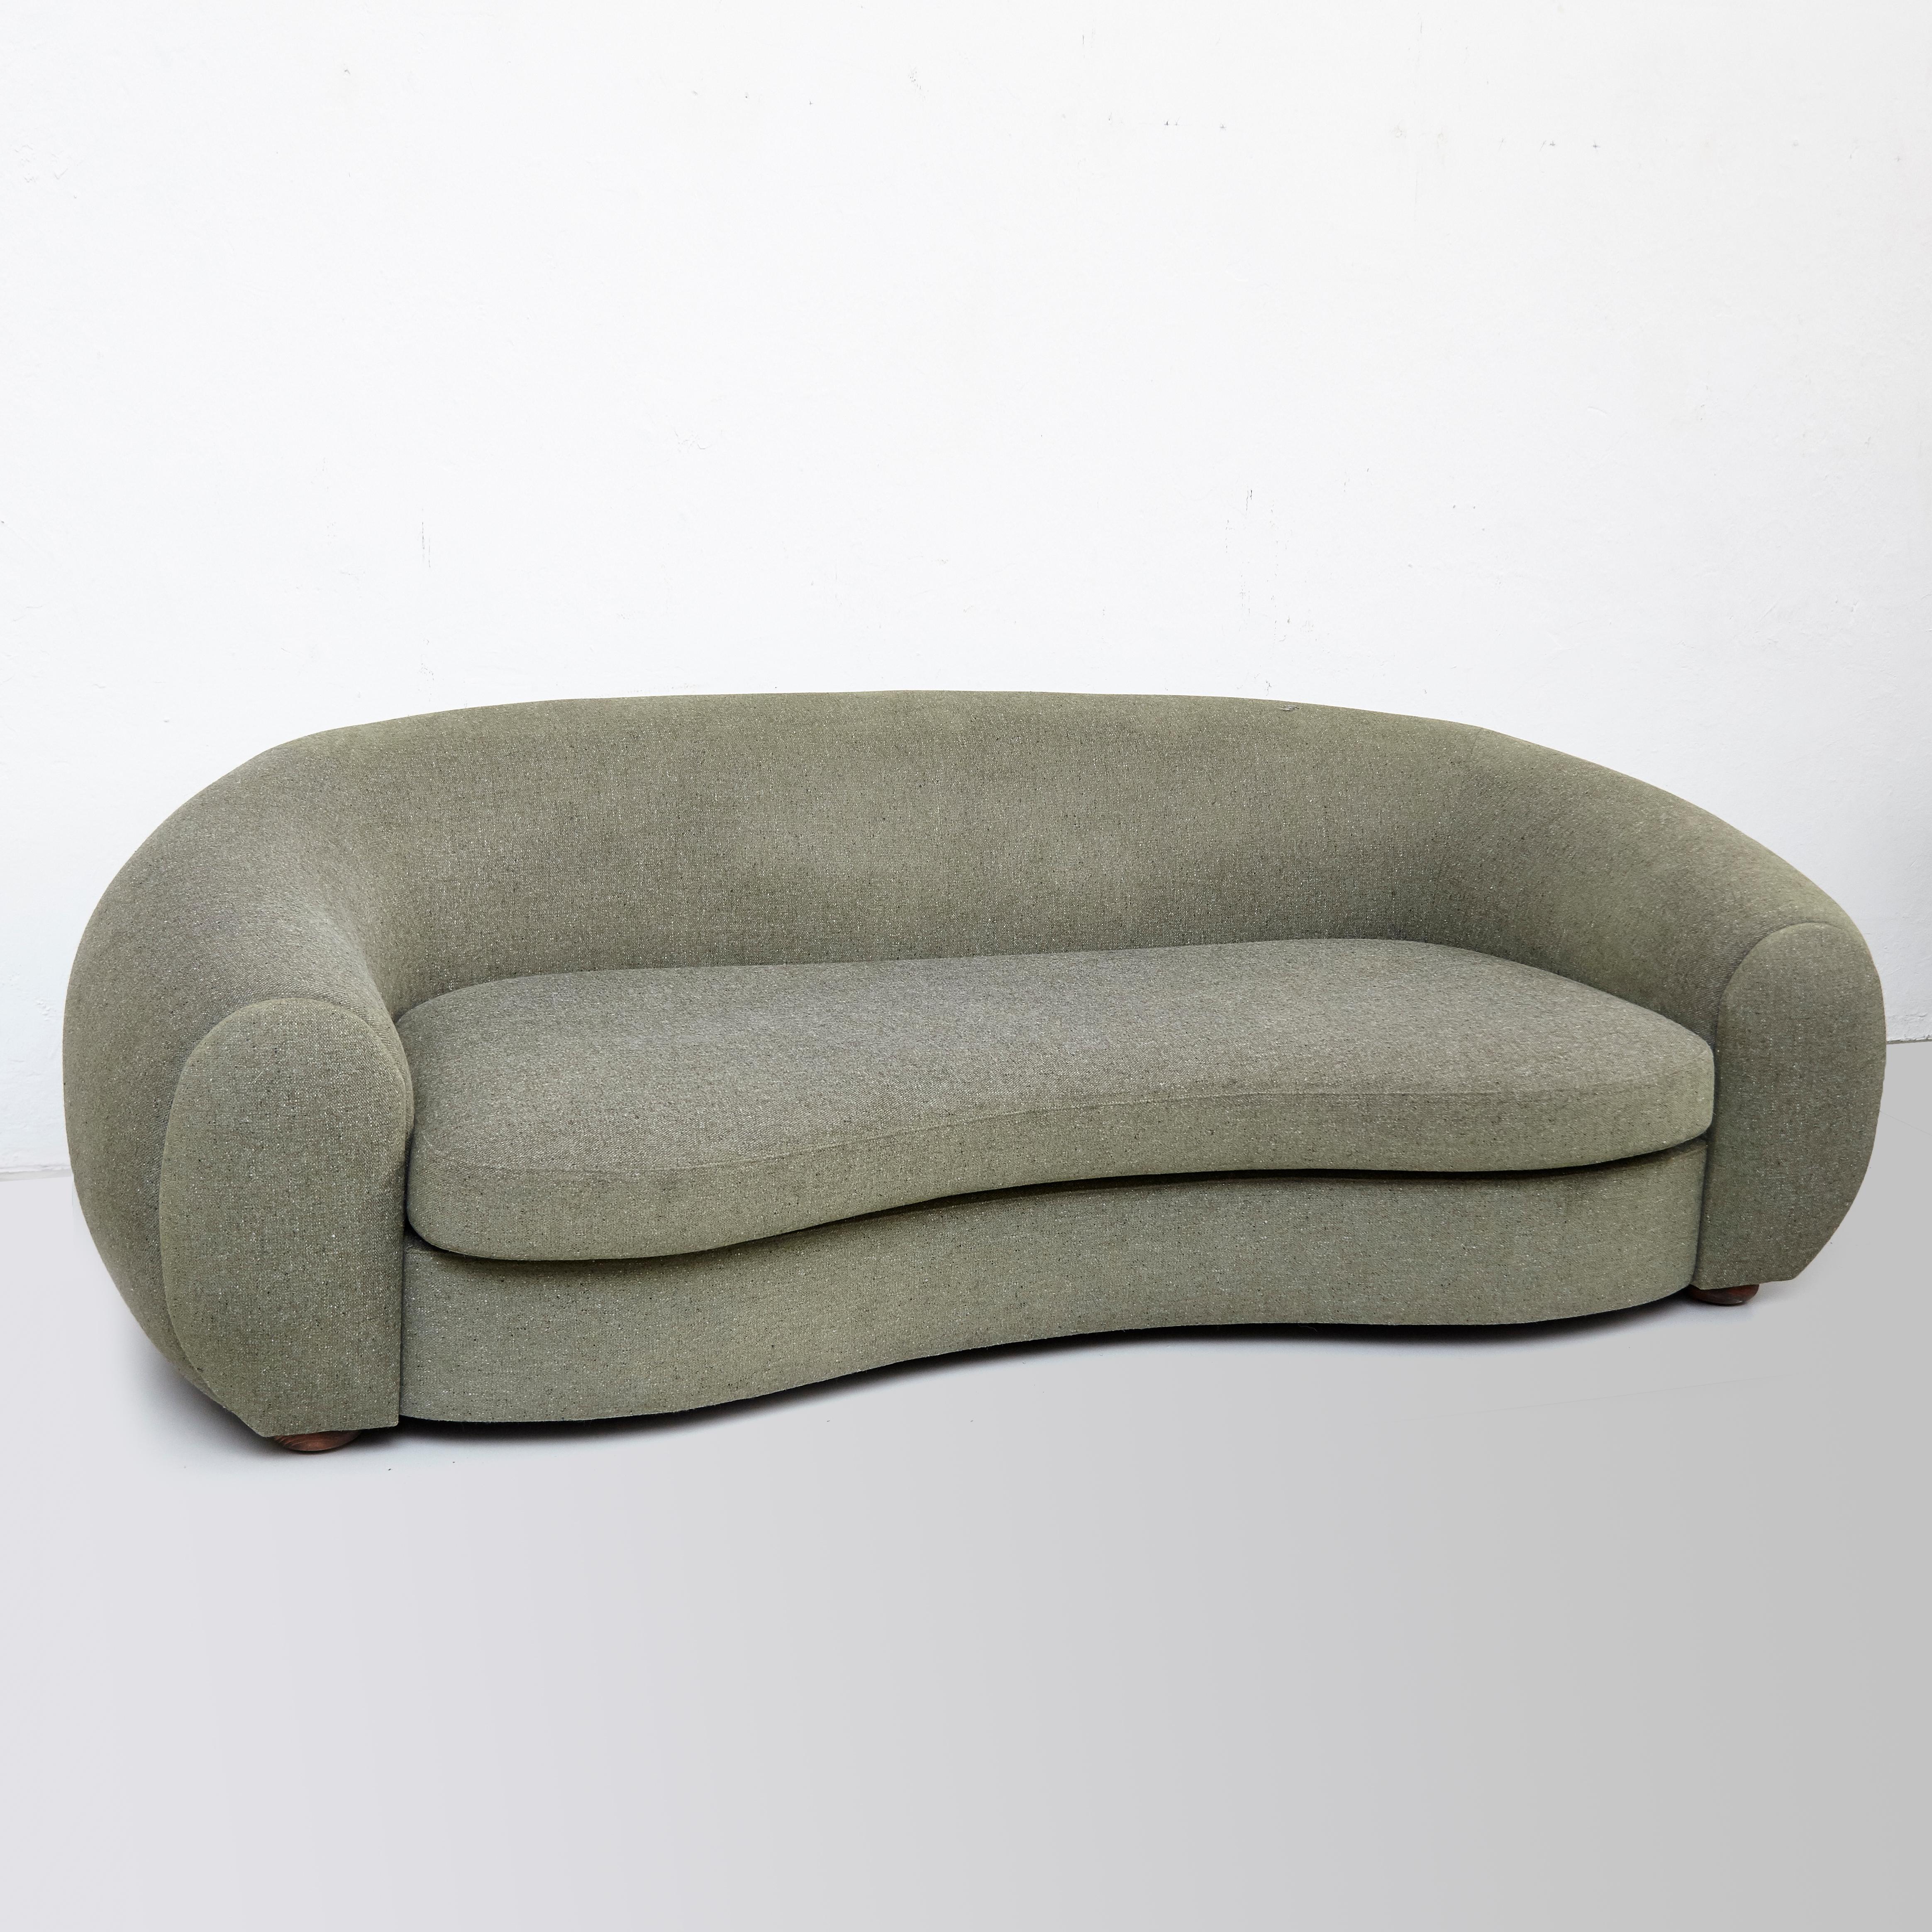 Green upholstered sofa 
Organic shape.
With refined upholstery.

In original condition, with wear consistent with age and use. It has a small break on on the fabric on on side.
It would definitely look great in any interior as it combines perfectly